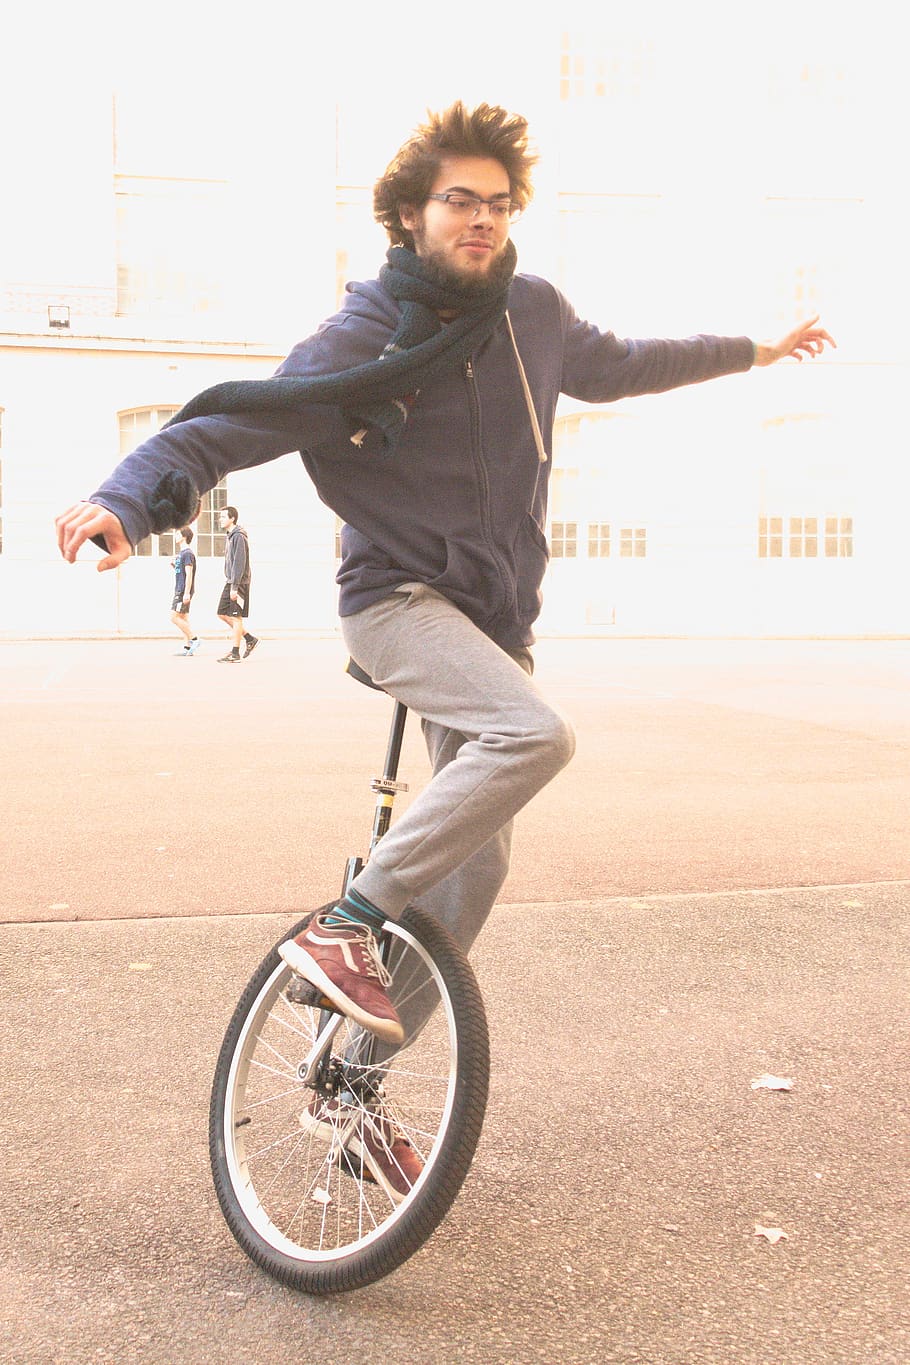 equilibrium, bike, cycle, unicycle, full length, one person